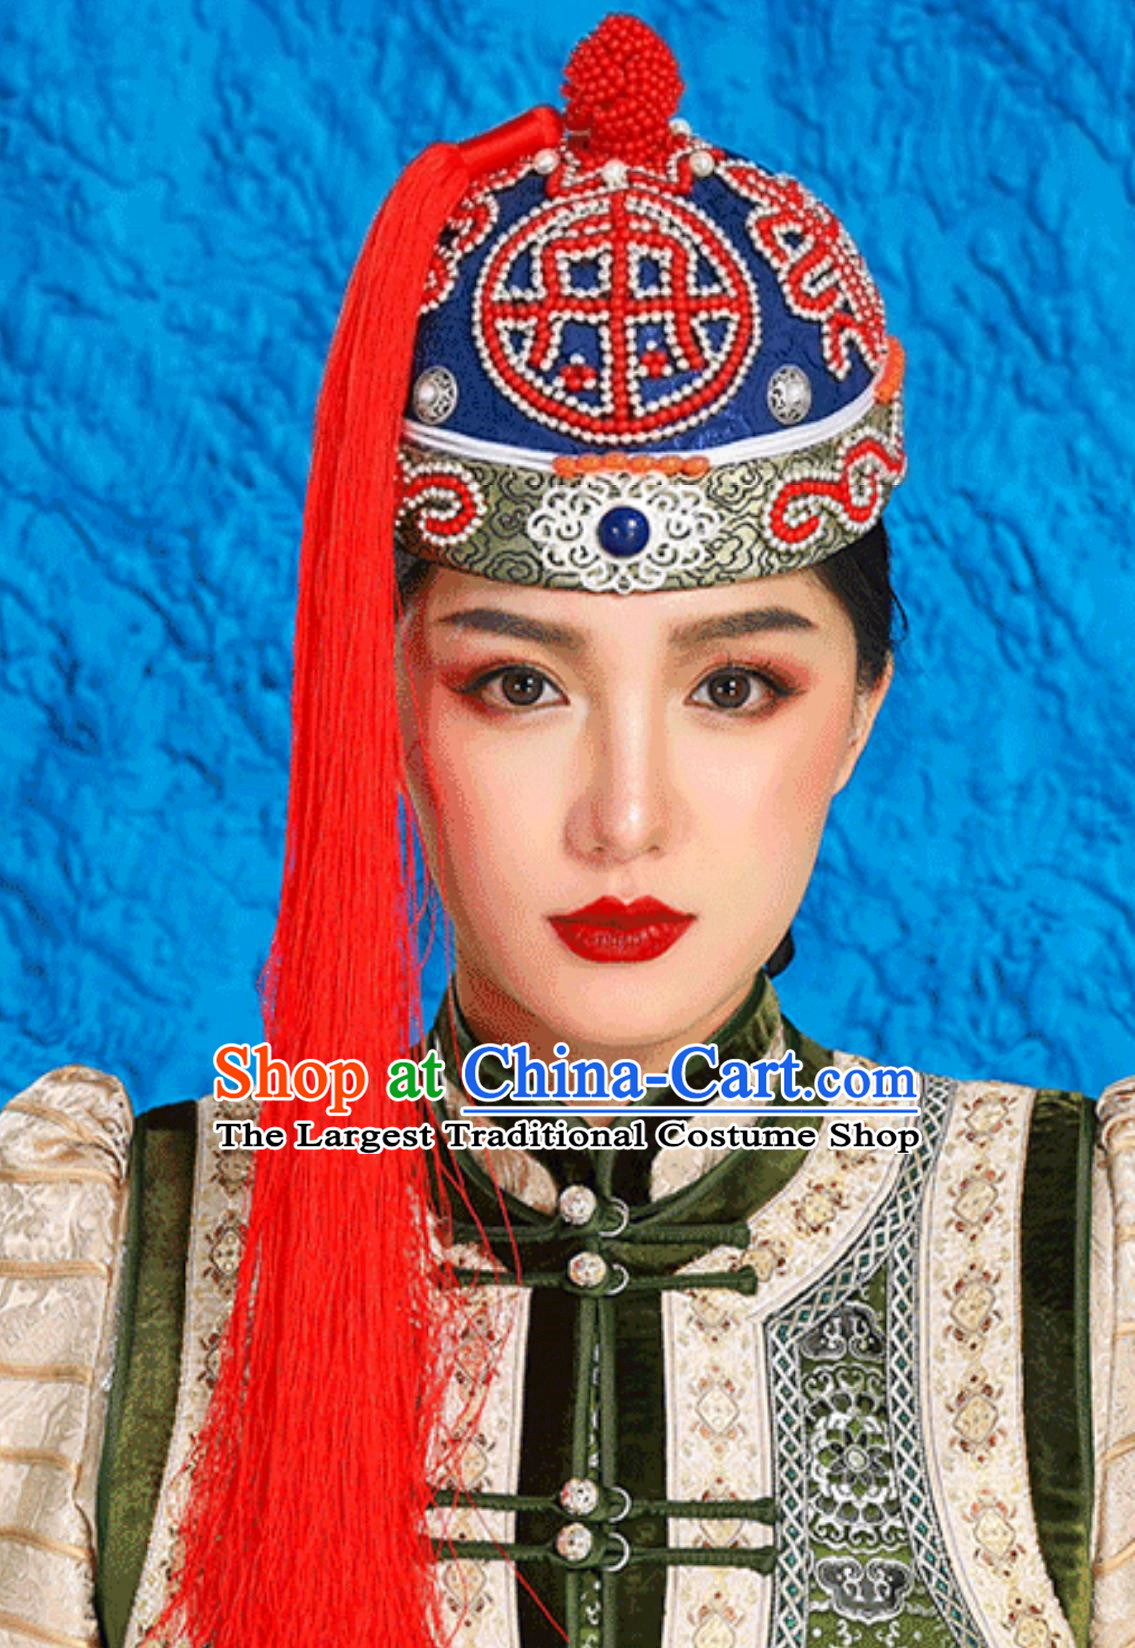 Tassel Landlord Hat Melon Shell Hat Red Hat With Mongolian Ethnic Characteristics